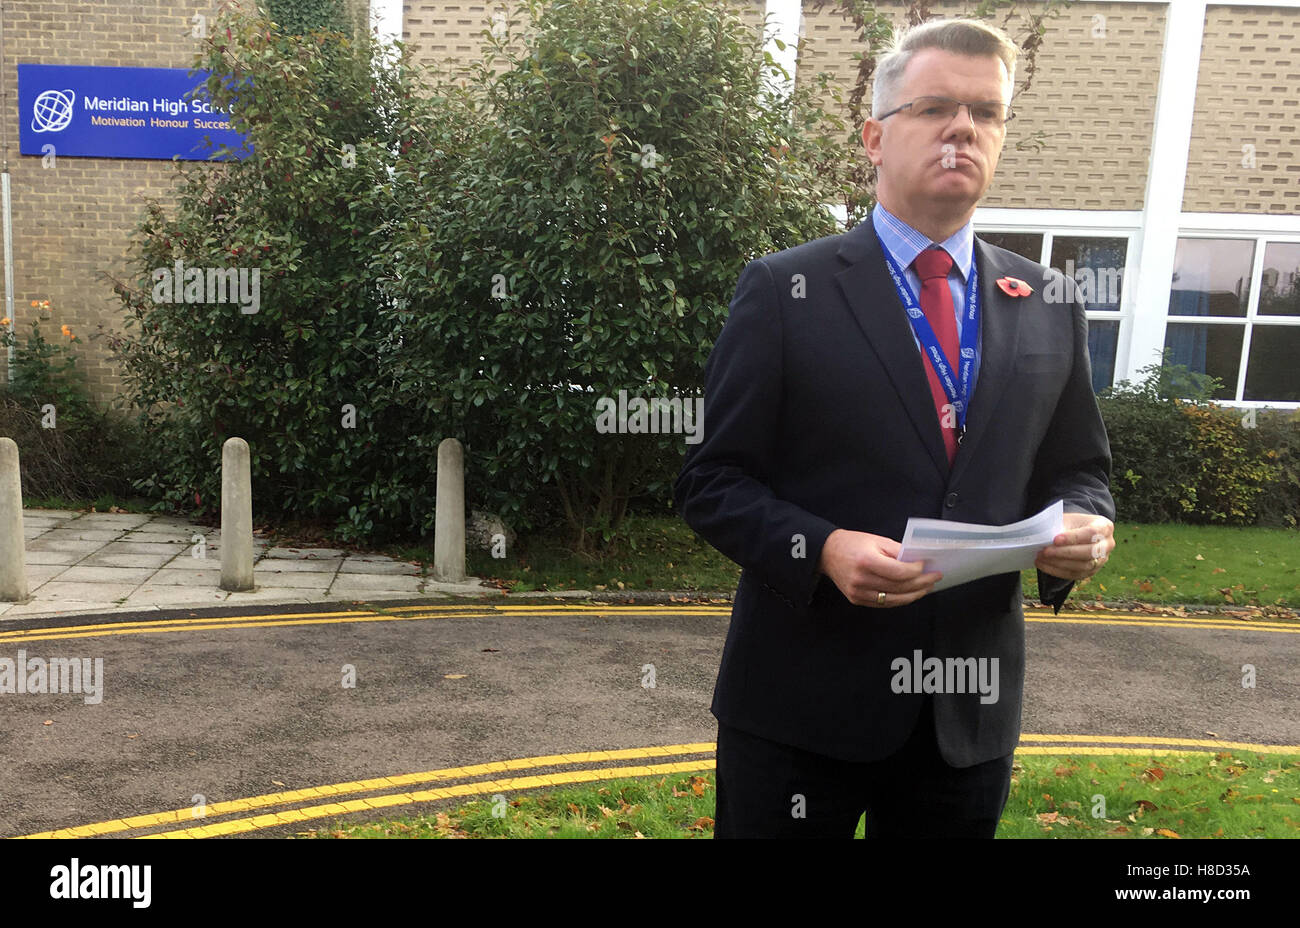 BEST QUALITY AVAILABLE Martin Giles, headteacher of Meridian High School, reads a statement outside the school in Croydon regarding the involvement of four ex-pupils in yesterday's tram crash, one of whom, Dale Chinnery, died. Stock Photo